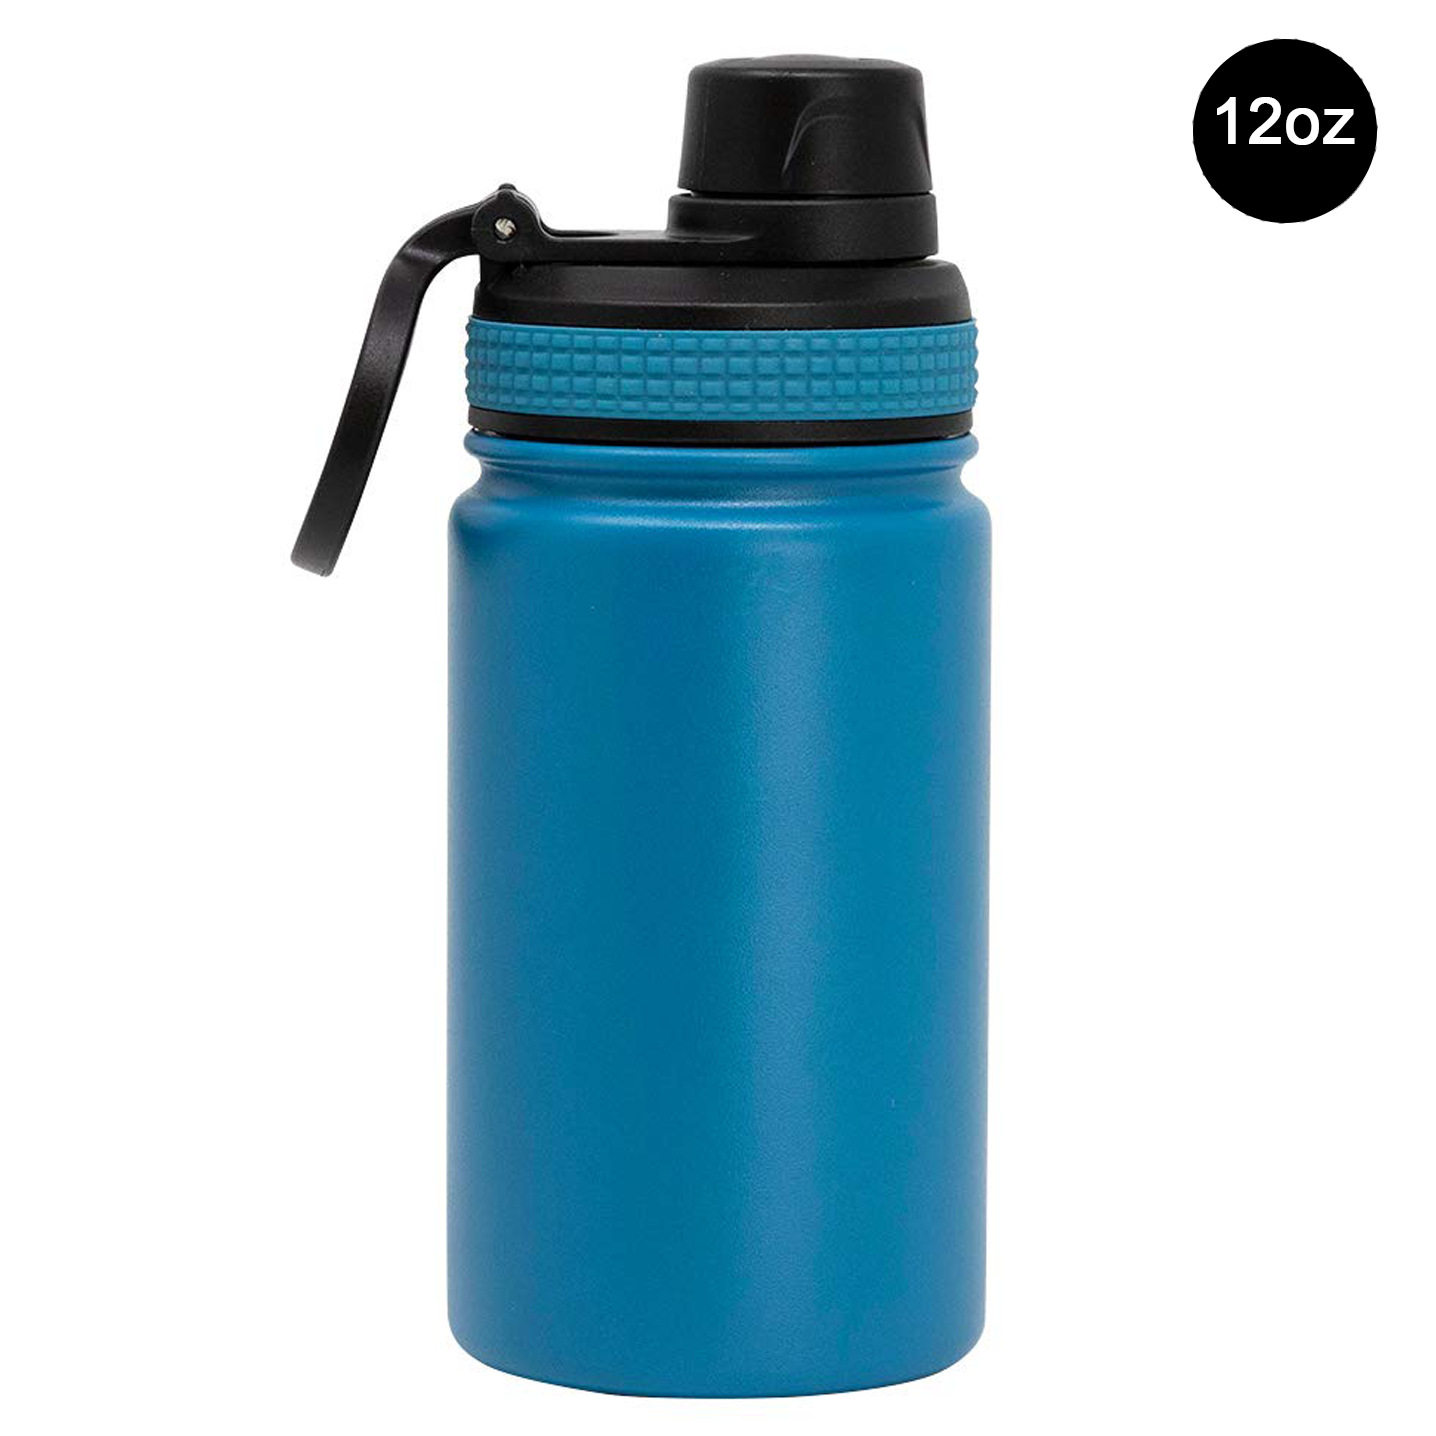 Flip sports kettle insulation cup space kettle| 12oz